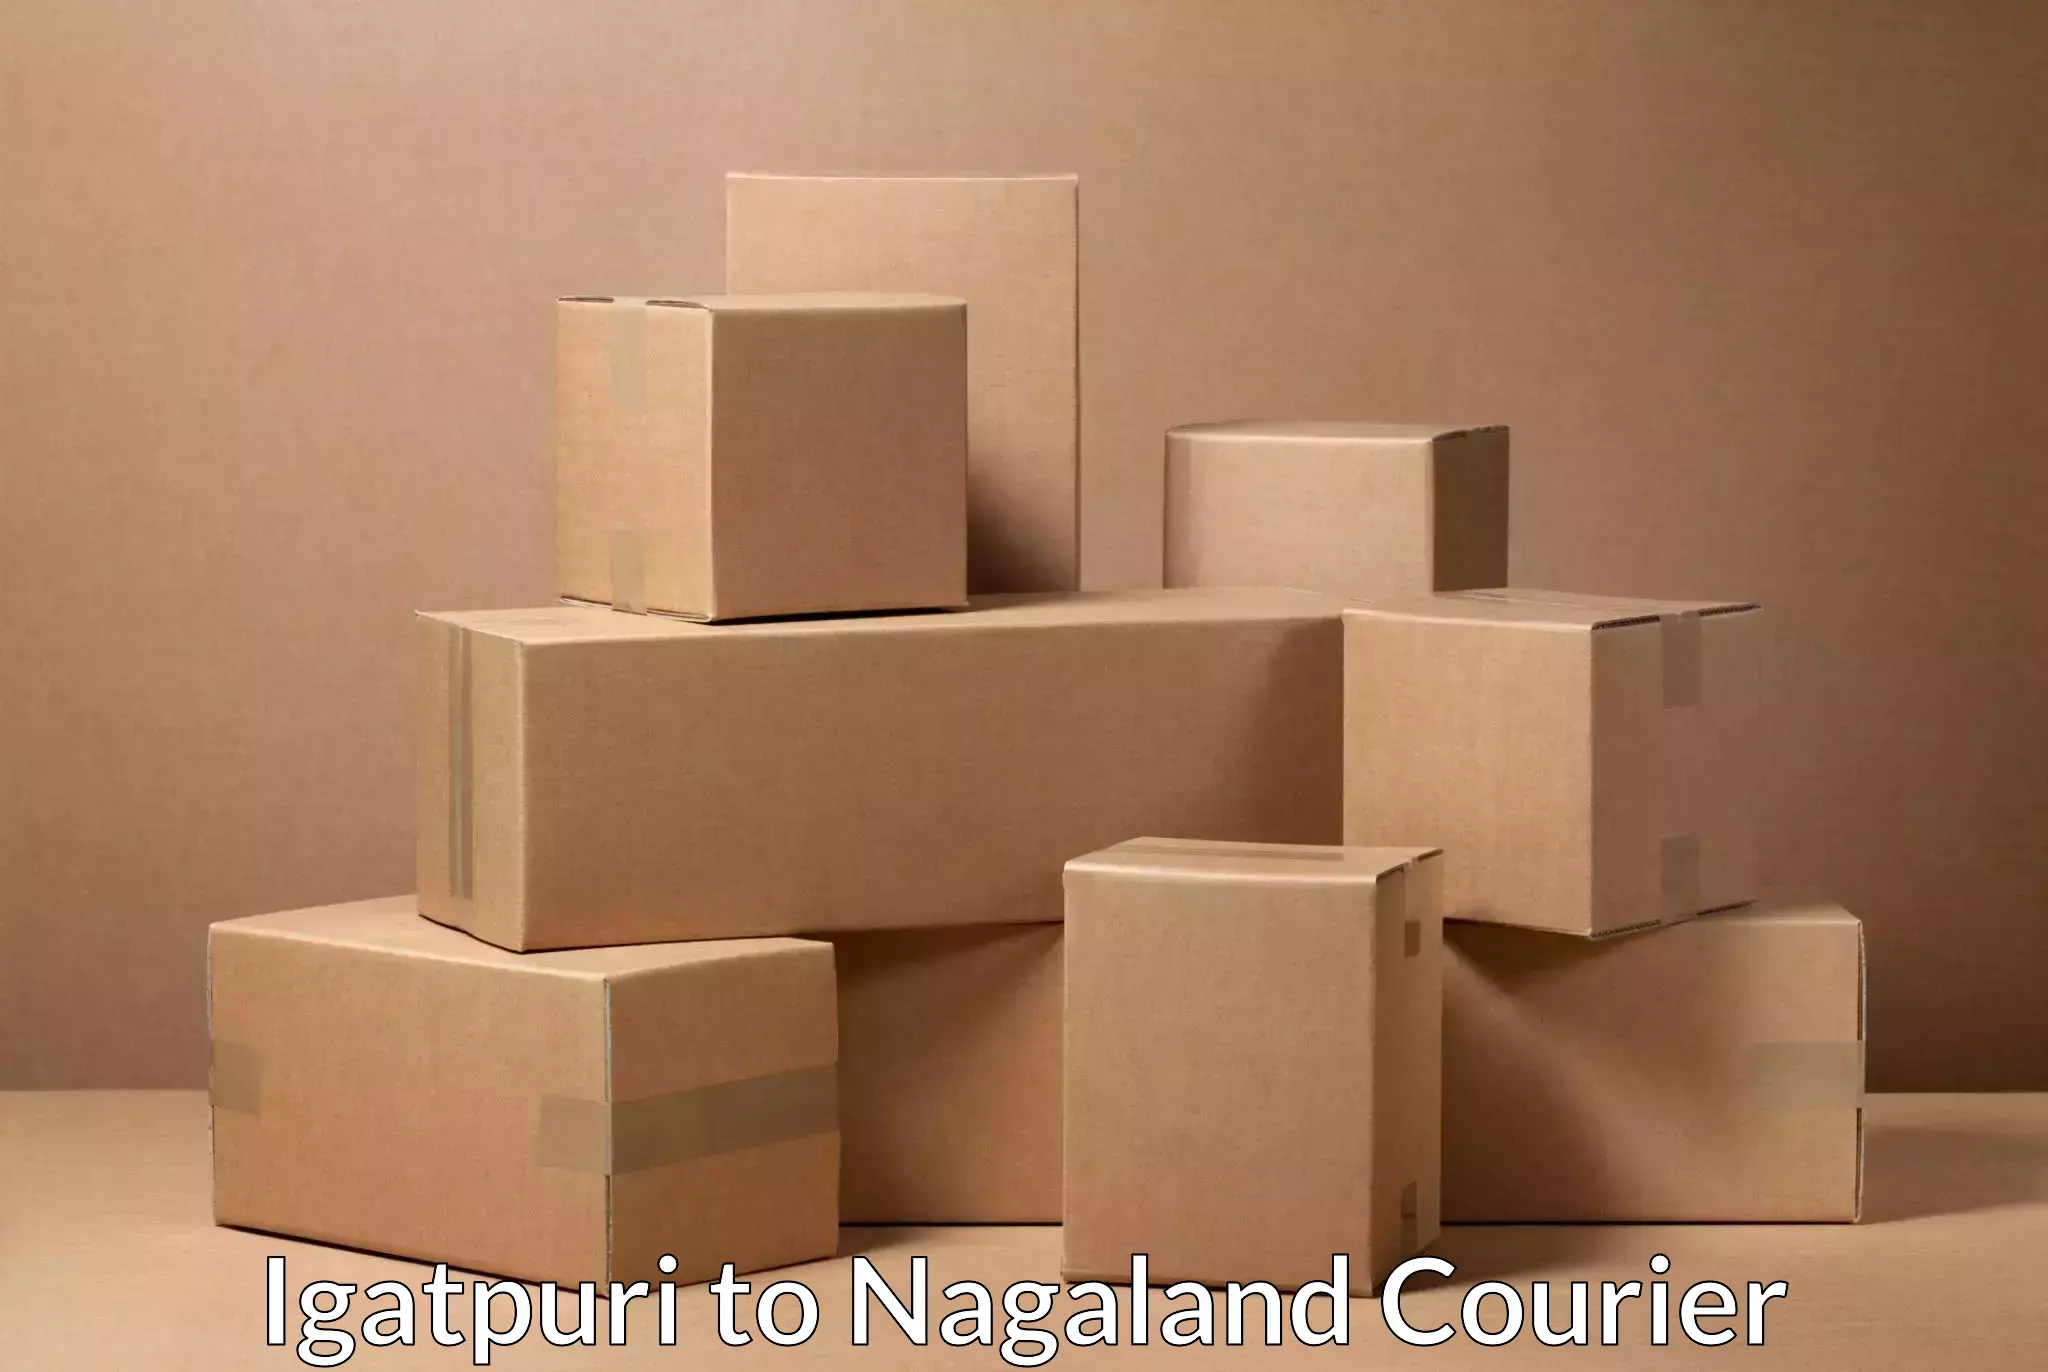 Full-service courier options in Igatpuri to Nagaland